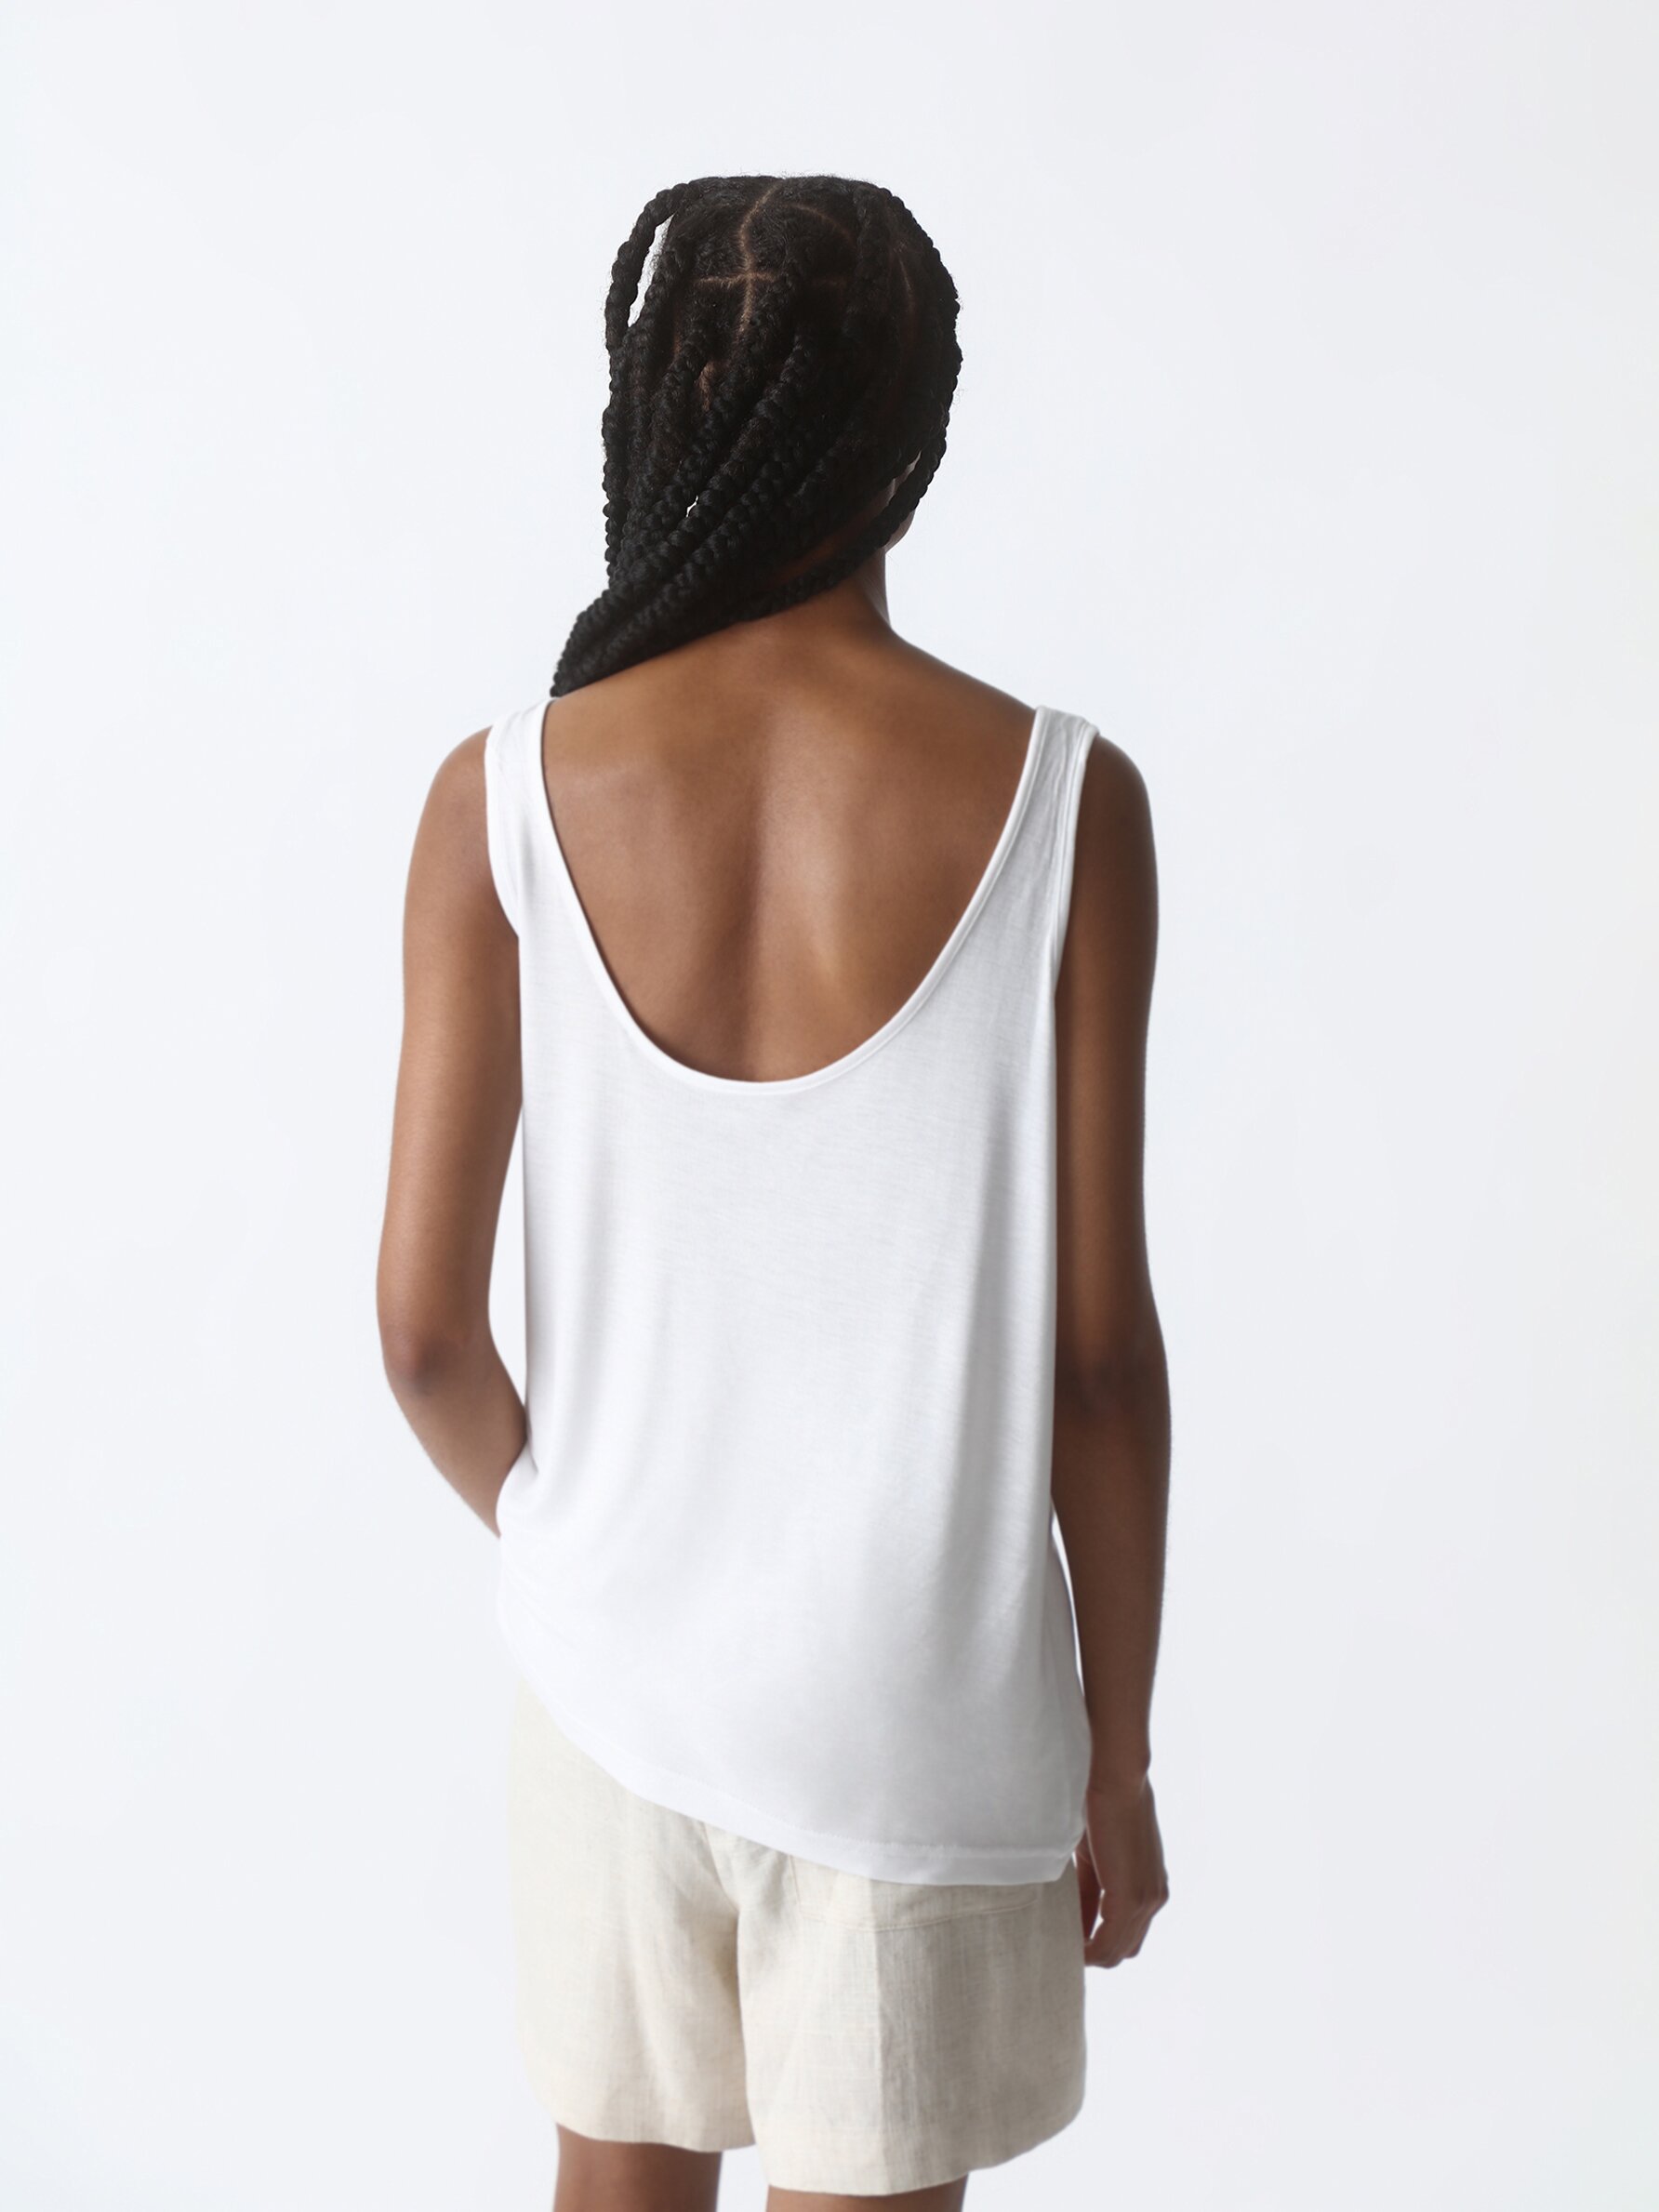 Loose-fitting tank top - Strappy tops - T-shirts - CLOTHING